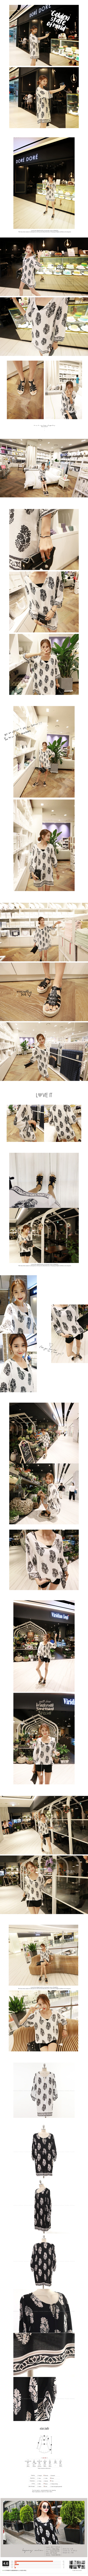 [Limited Quantity Sale] Ethnic Style Shirring Tunic Blouse Ivory One Size(Free) [New Arrival]